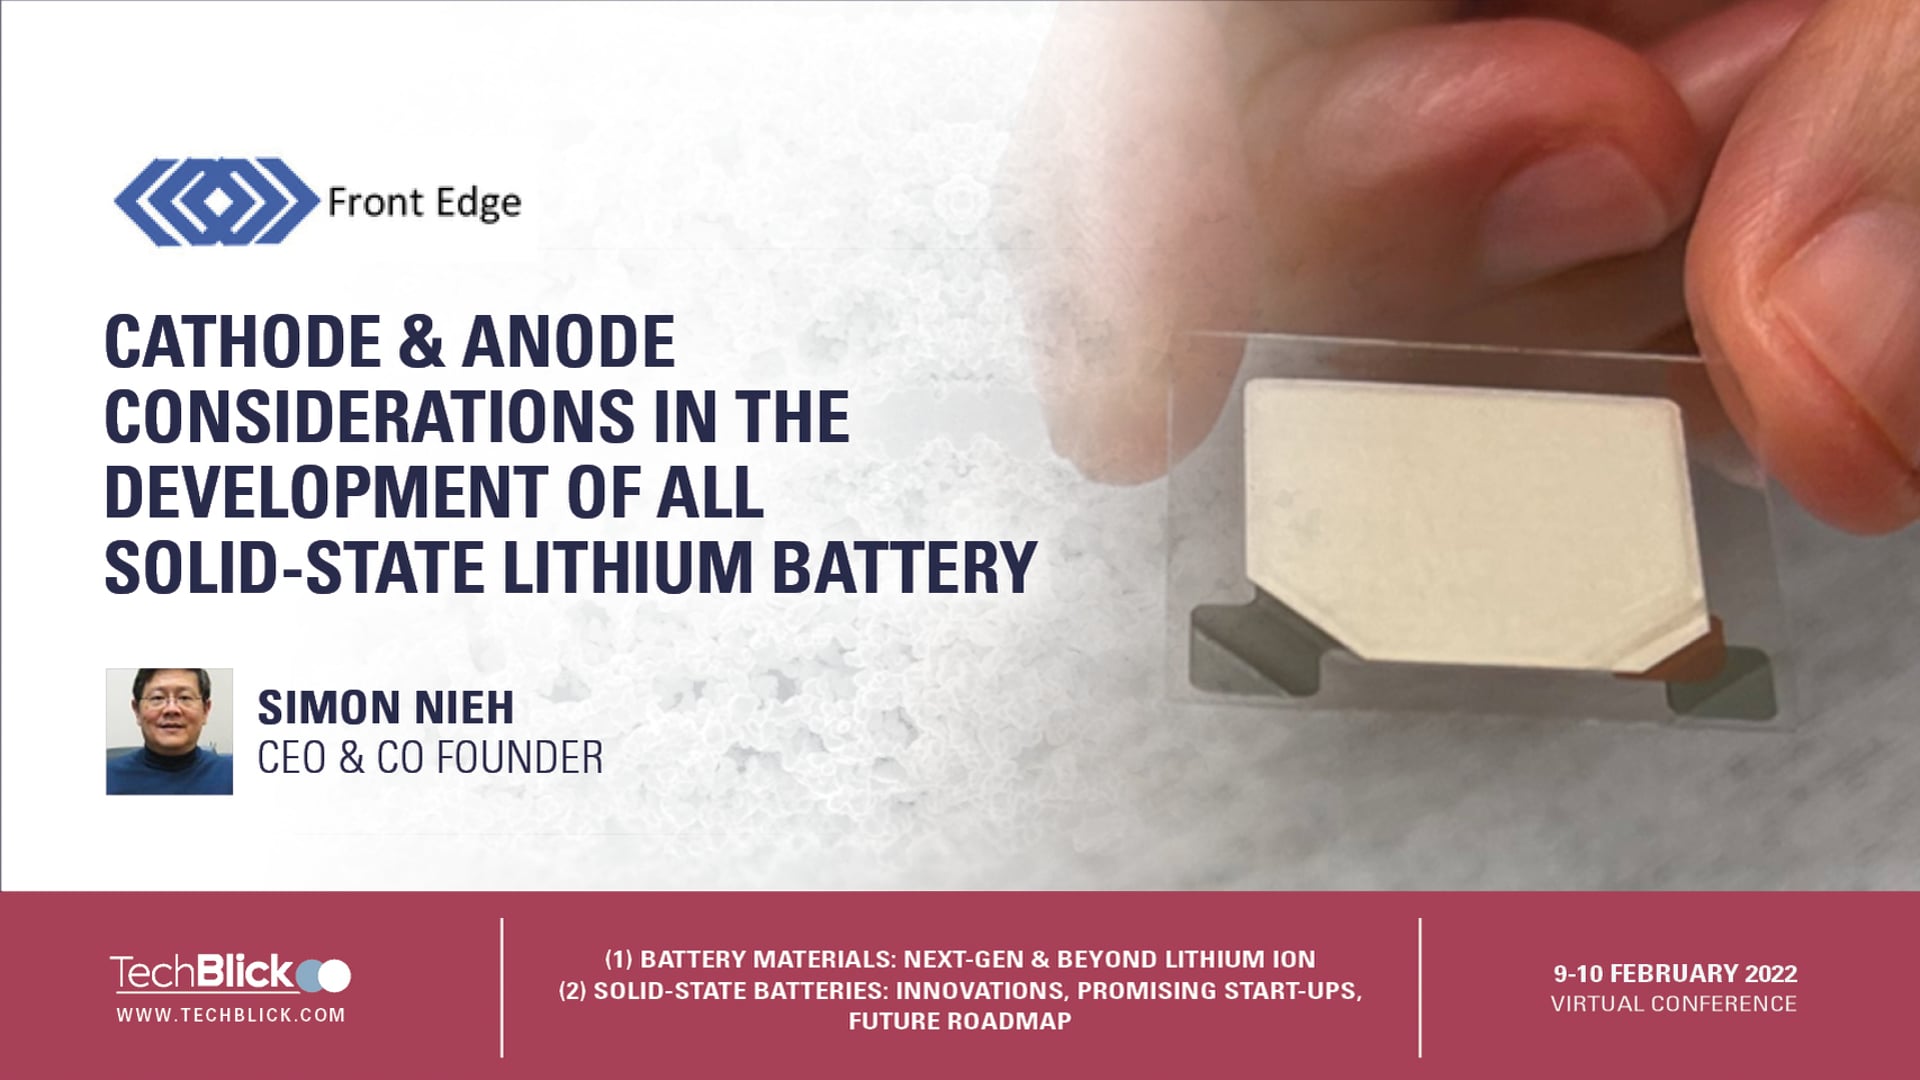 Front Edge Technology - Cathode and anode considerations in the development of all solid-state Lithium battery